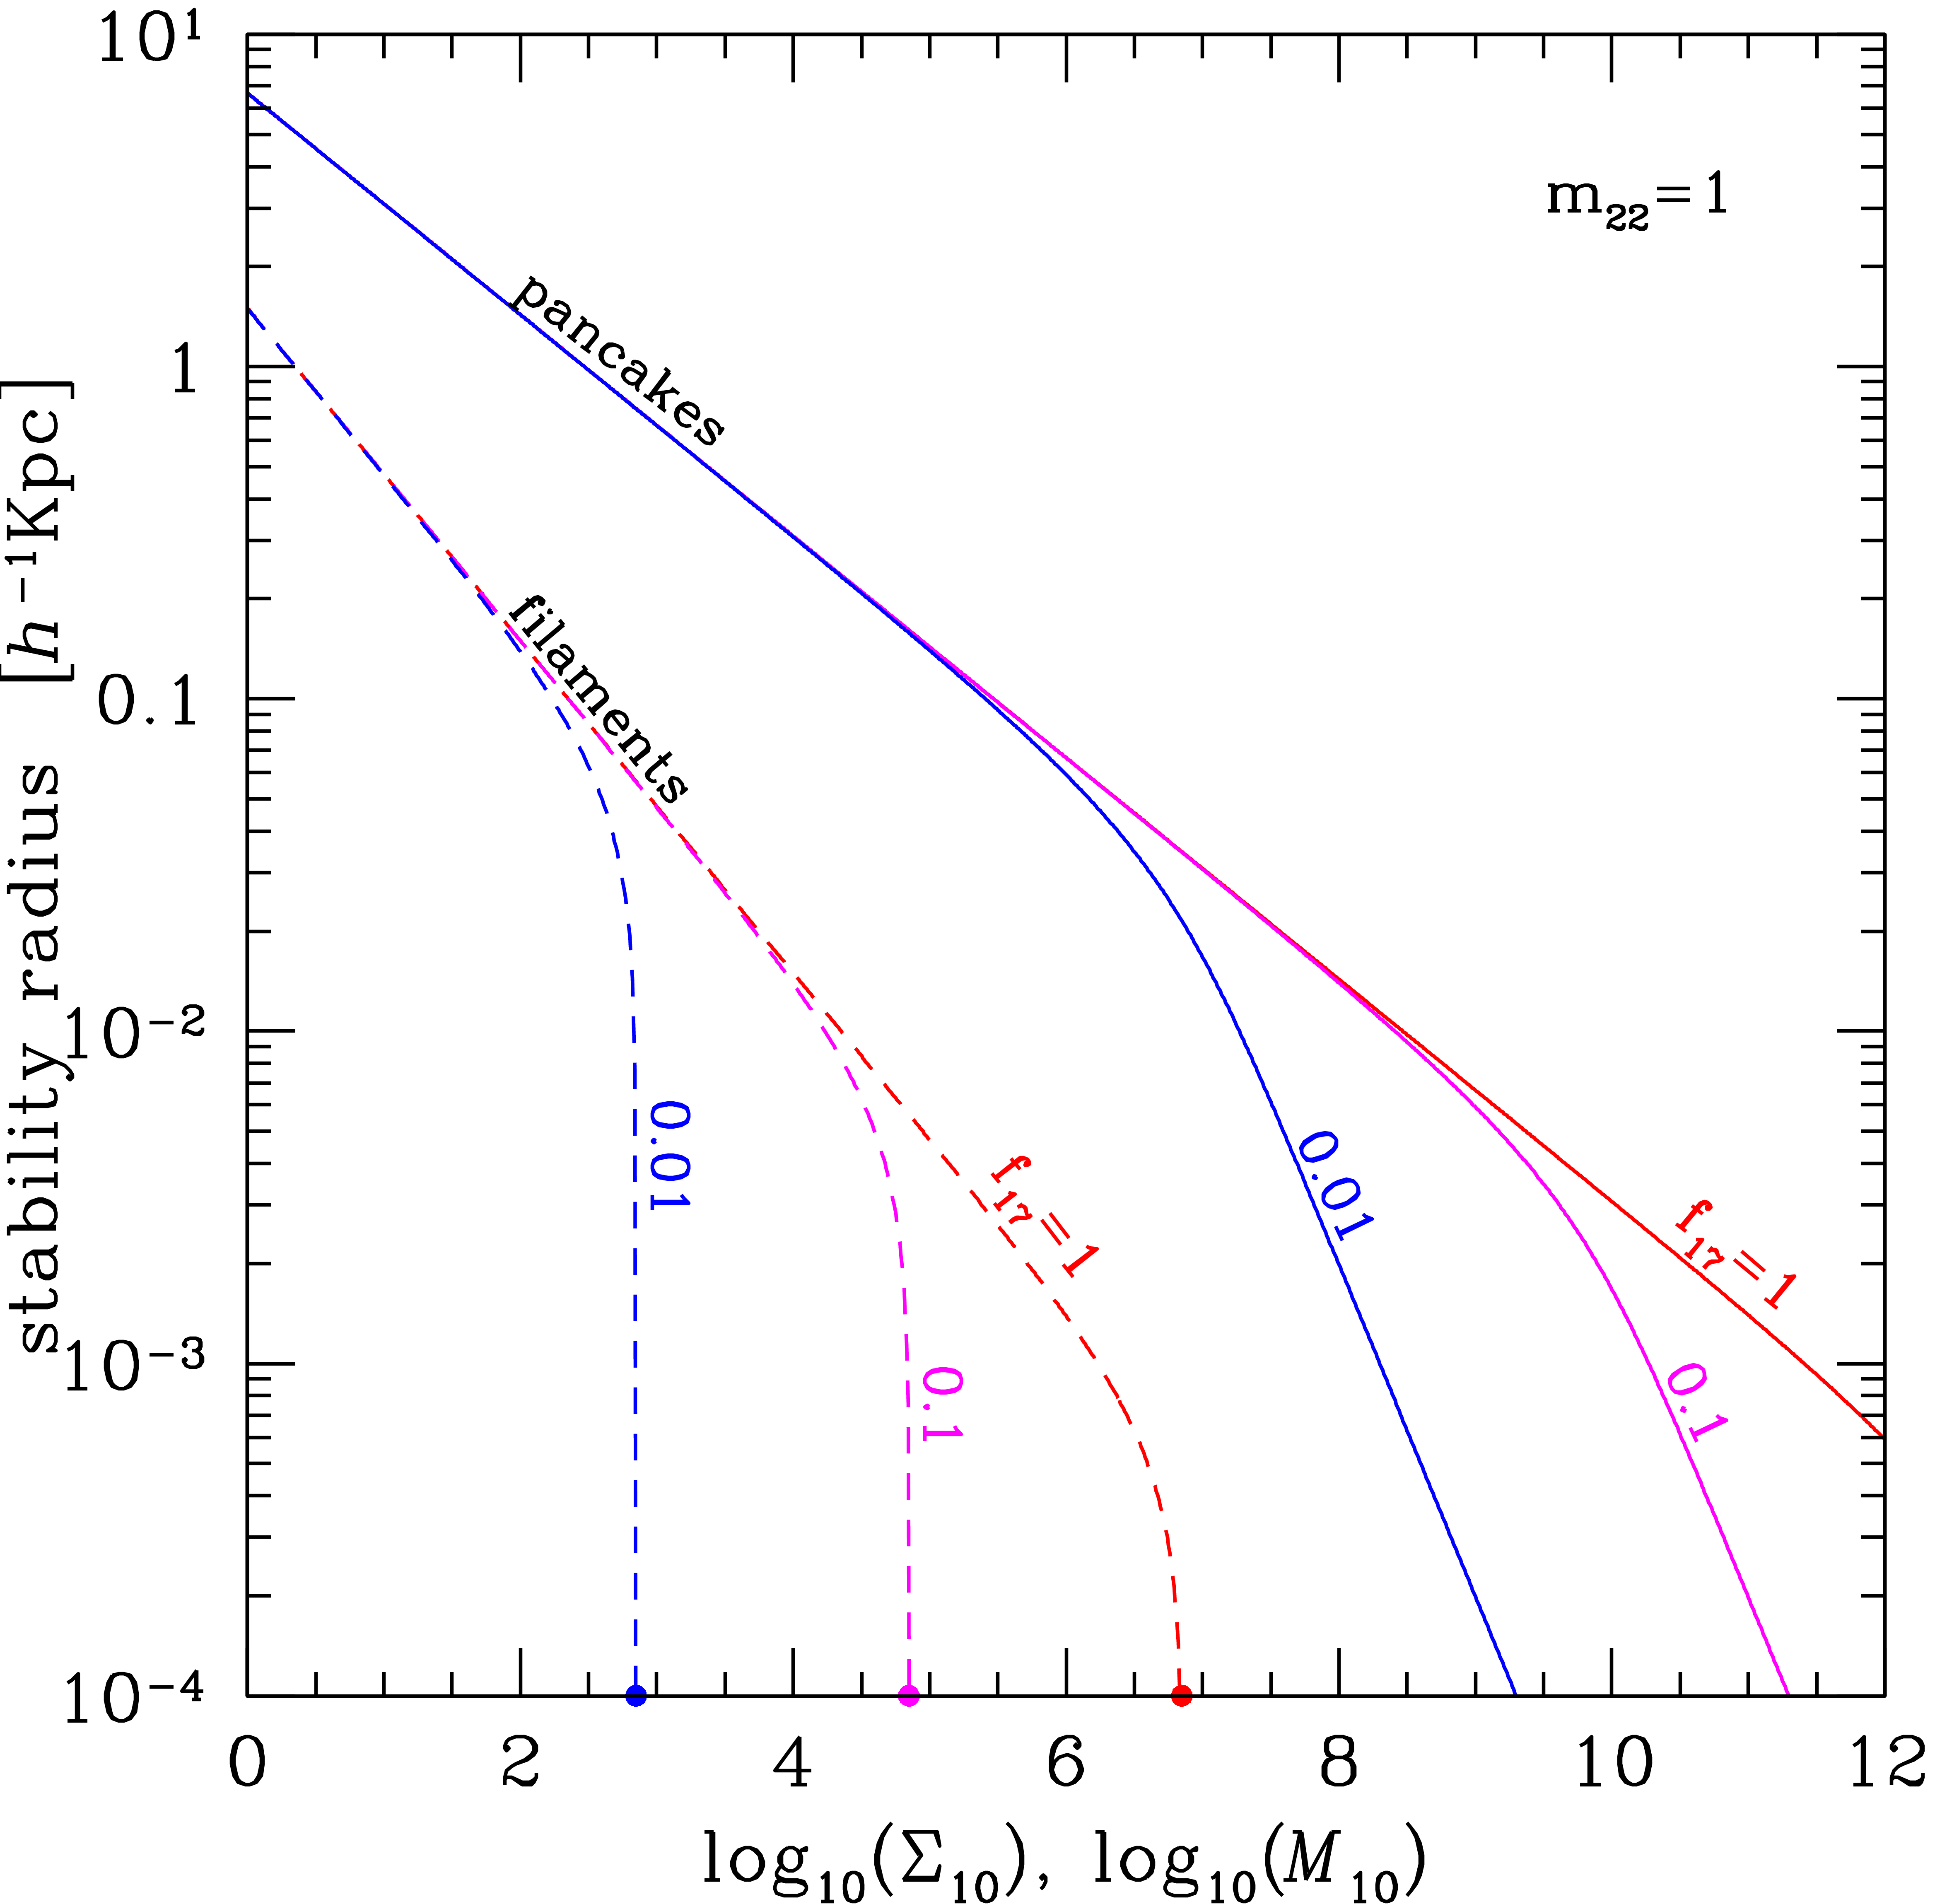 Stability radius of the solitonic core for pancakes (N = 1) and filaments (N = 2) as a function of the core surface
density Σ10 and mass per unit length M10, respectively.